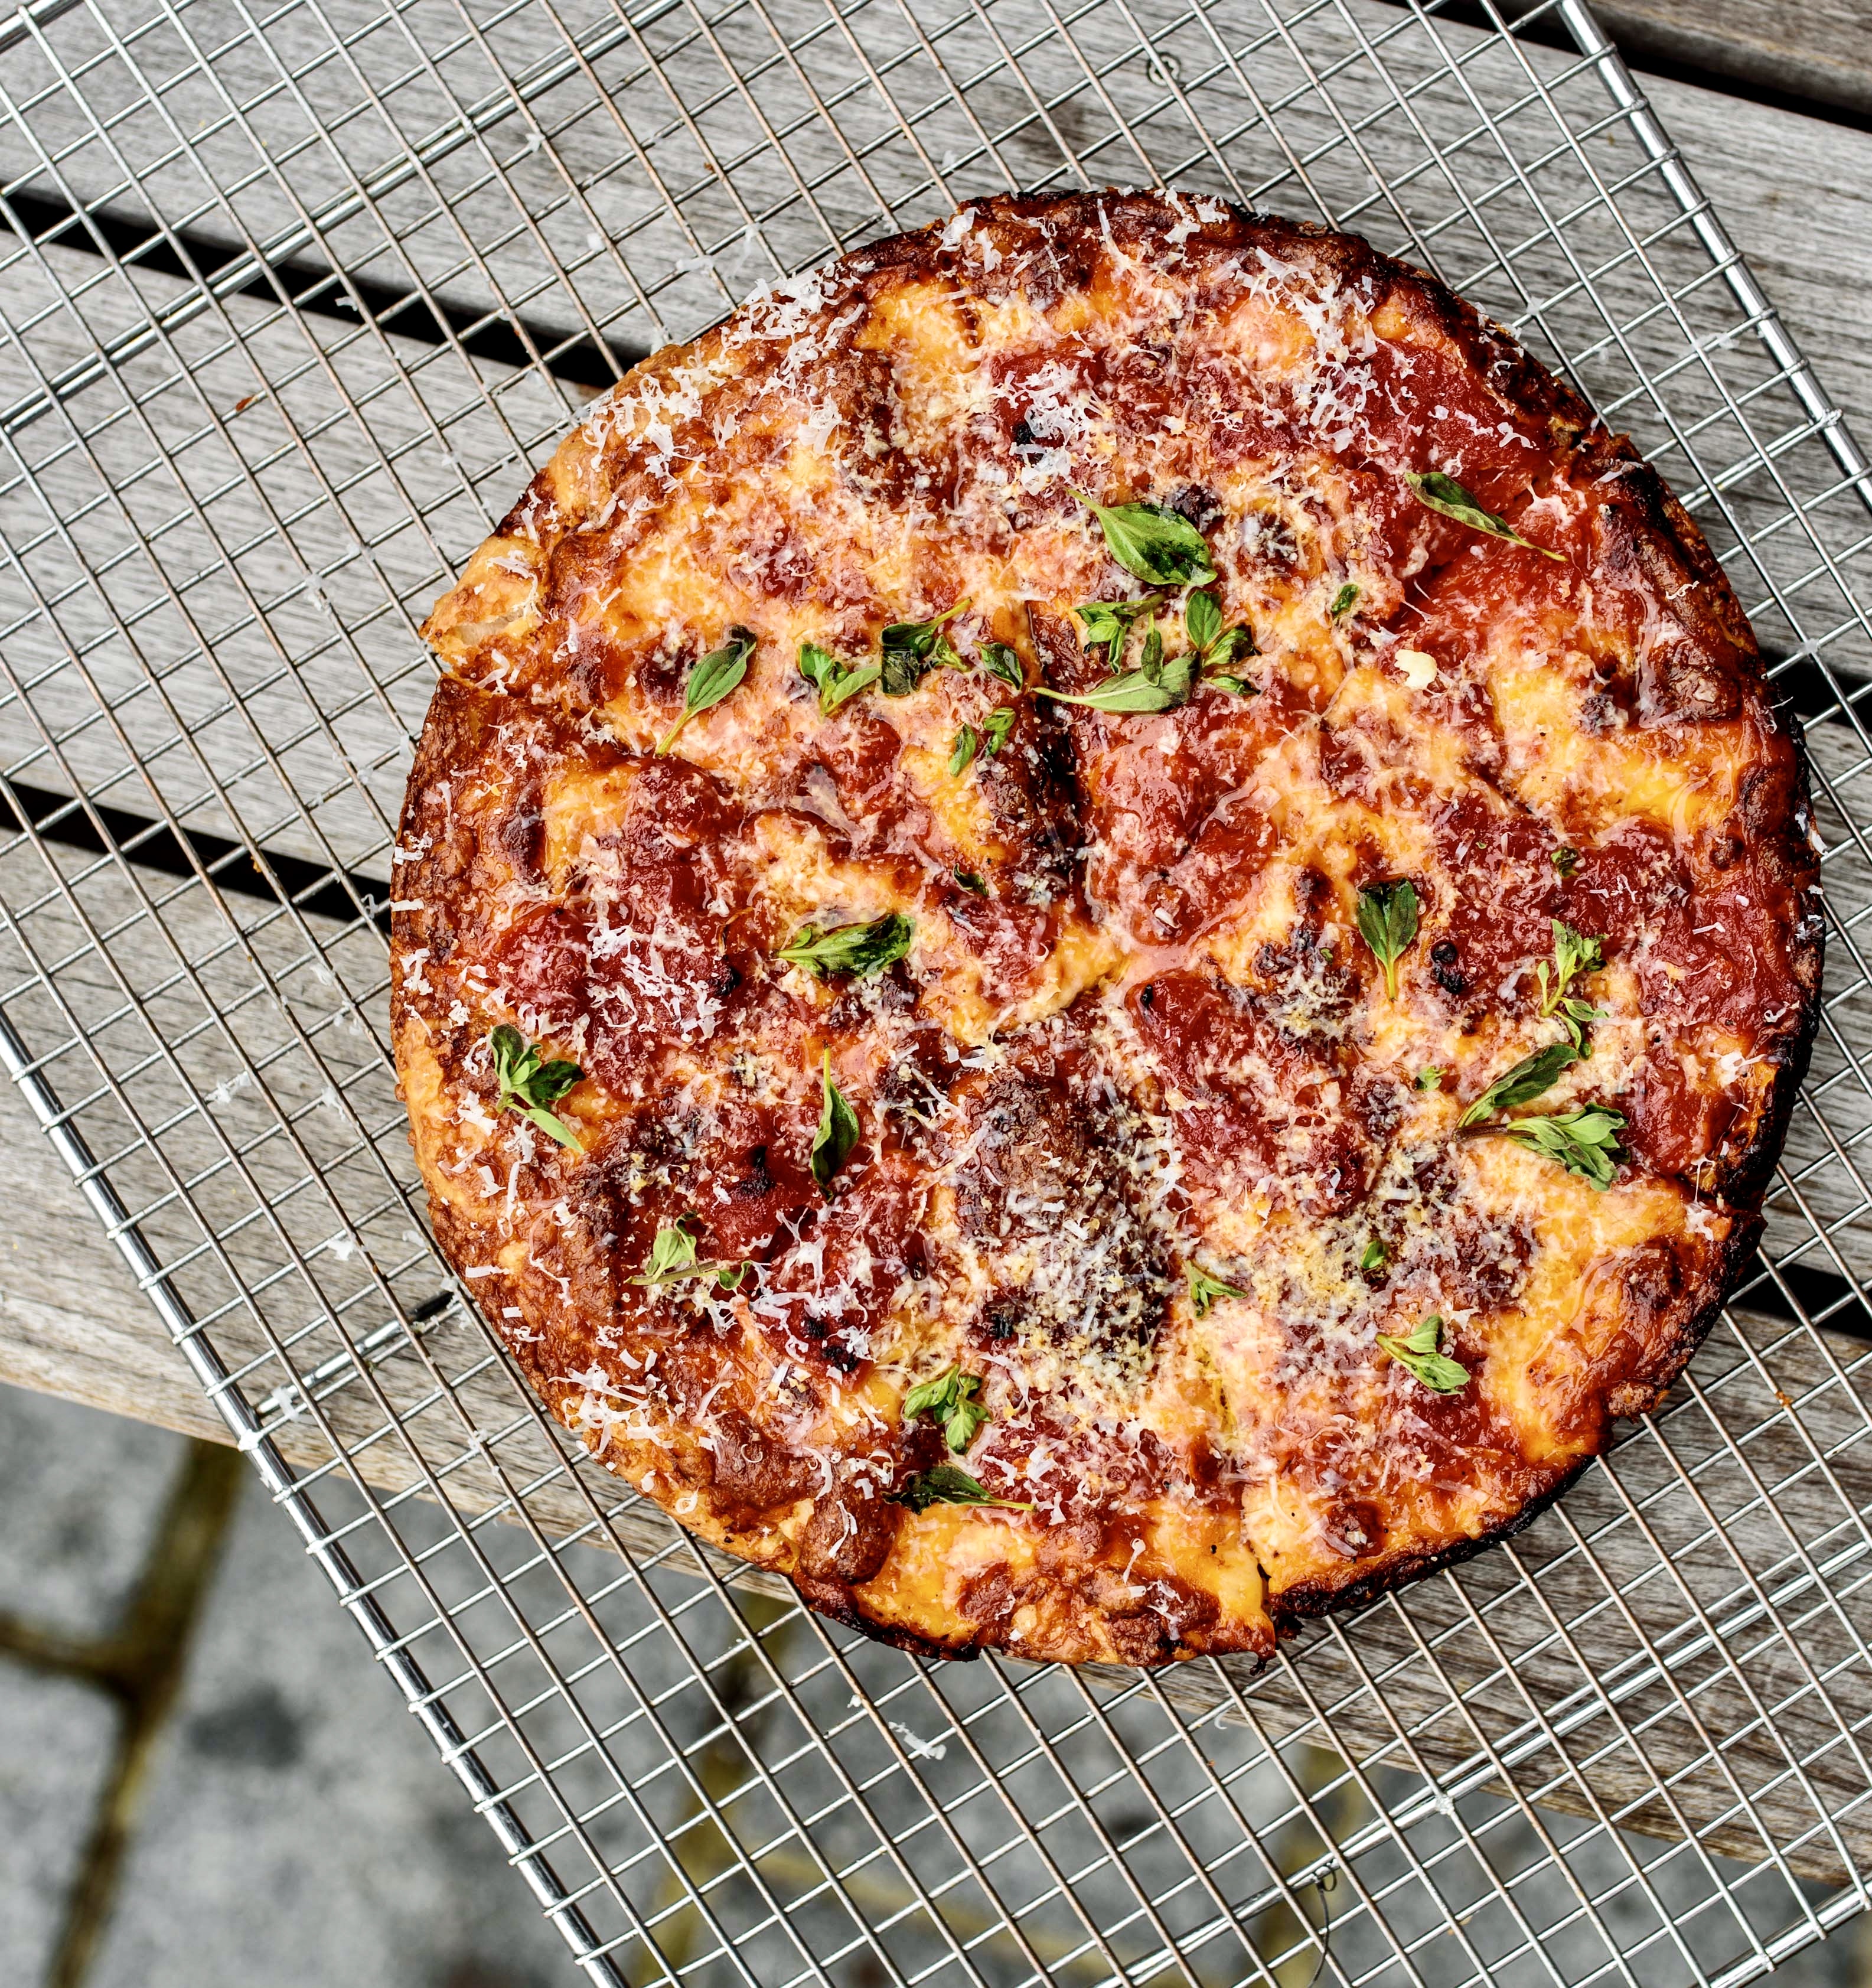 A pan pizza with a 72-hour fermented dough from Grazie Grazie